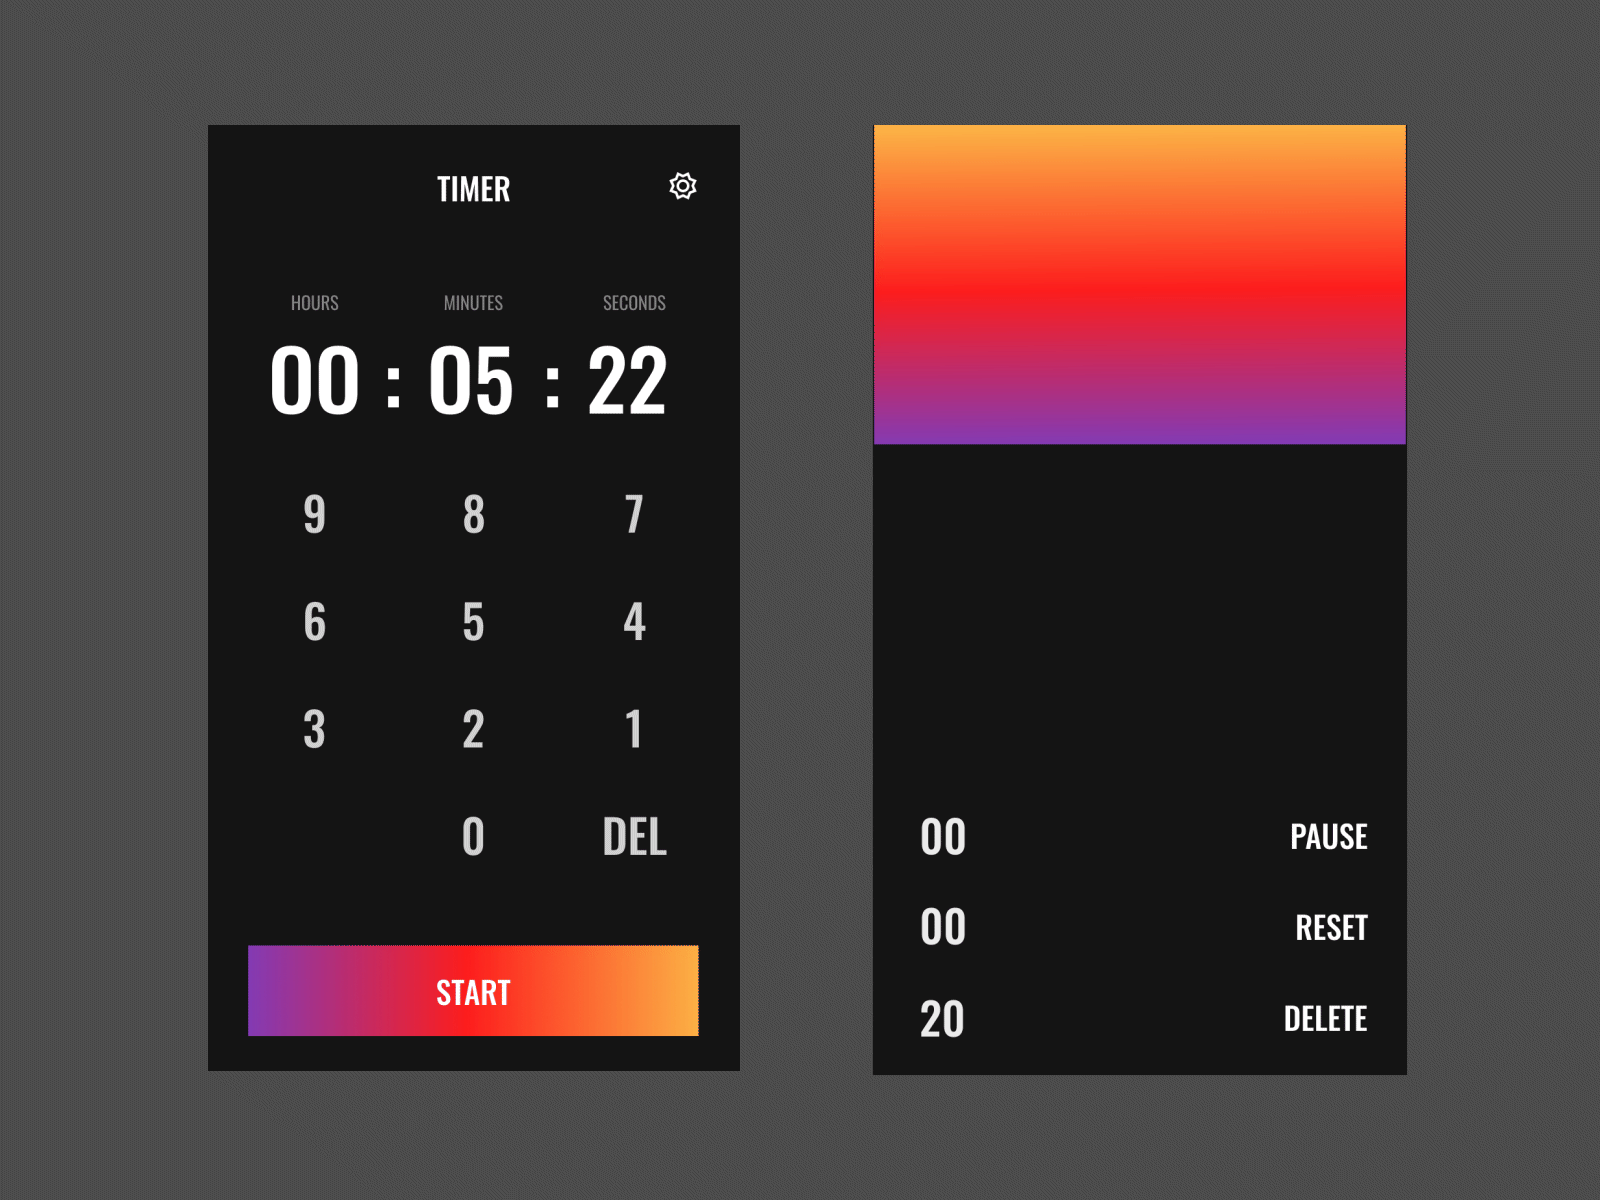 Gradient Countdown Timer - Daily UI 014 countdown countdown timer countdowntimer daily daily 100 challenge daily ui daily ui 014 dailyui gradient gradients